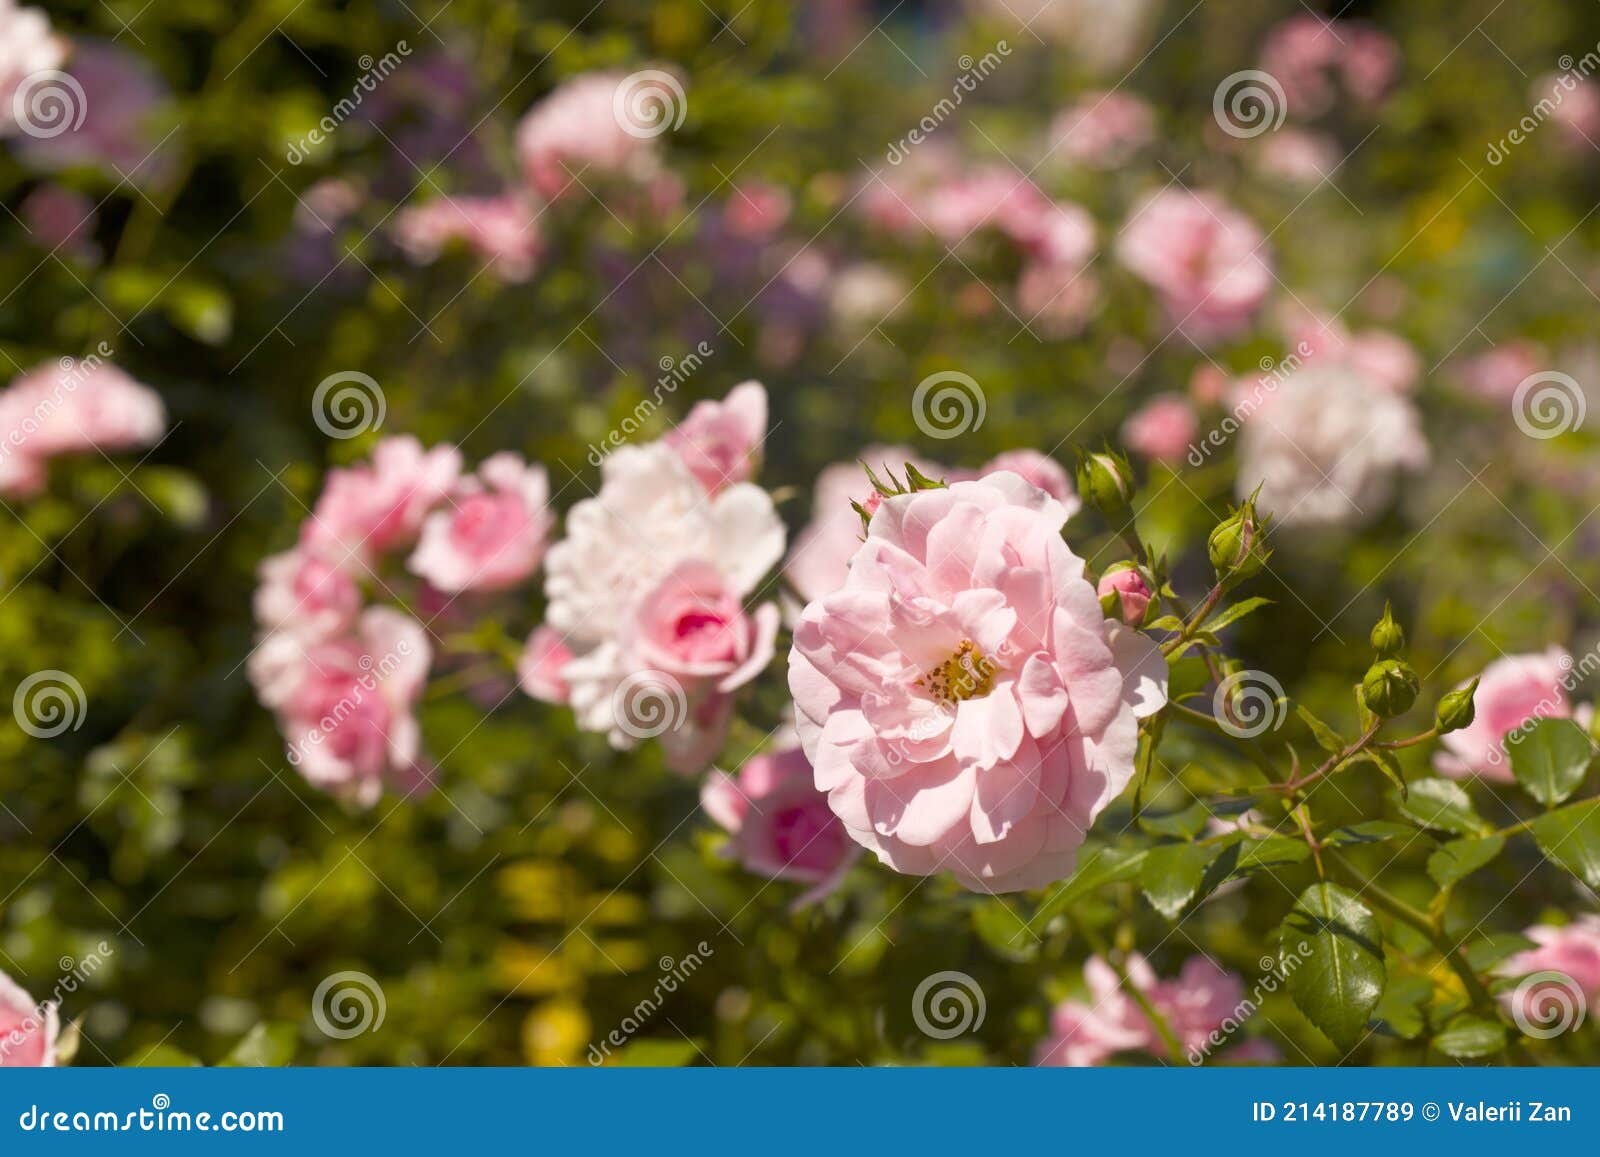 Bushes of Pink Roses in the Garden Stock Image - Image of blossom ...